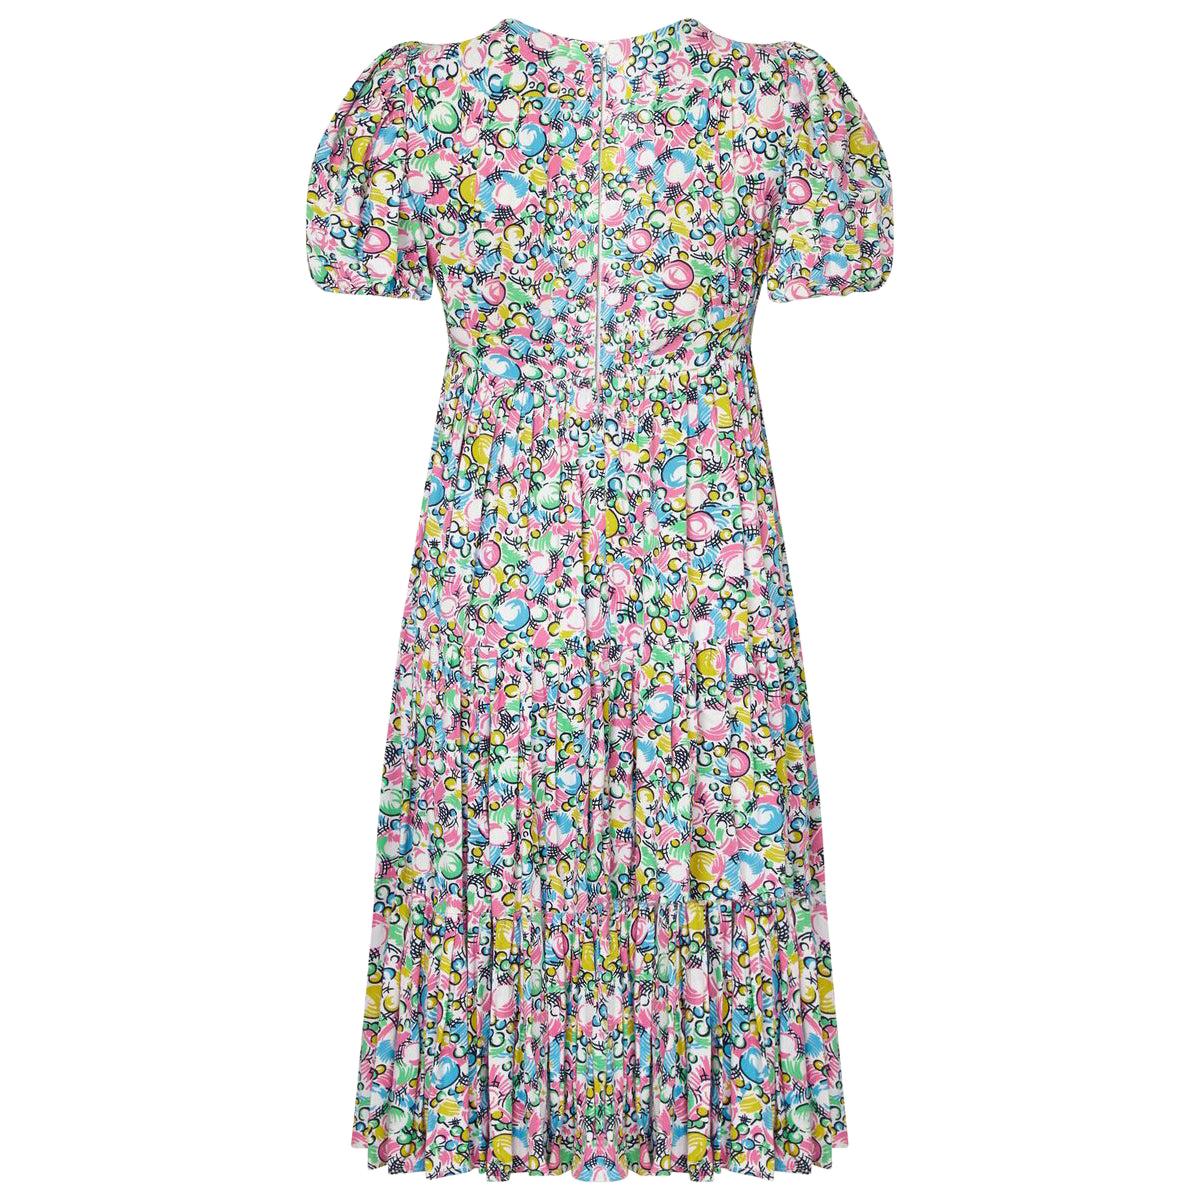 This charming circa 1969 cotton dress by Ossie Clark for Radley boasts a pretty 'bubble' print by celebrated textile designer Celia Birtwell.  This piece is pretty and gamine with puff sleeves and a wide Empire line waistband. The skirt has 3 x soft